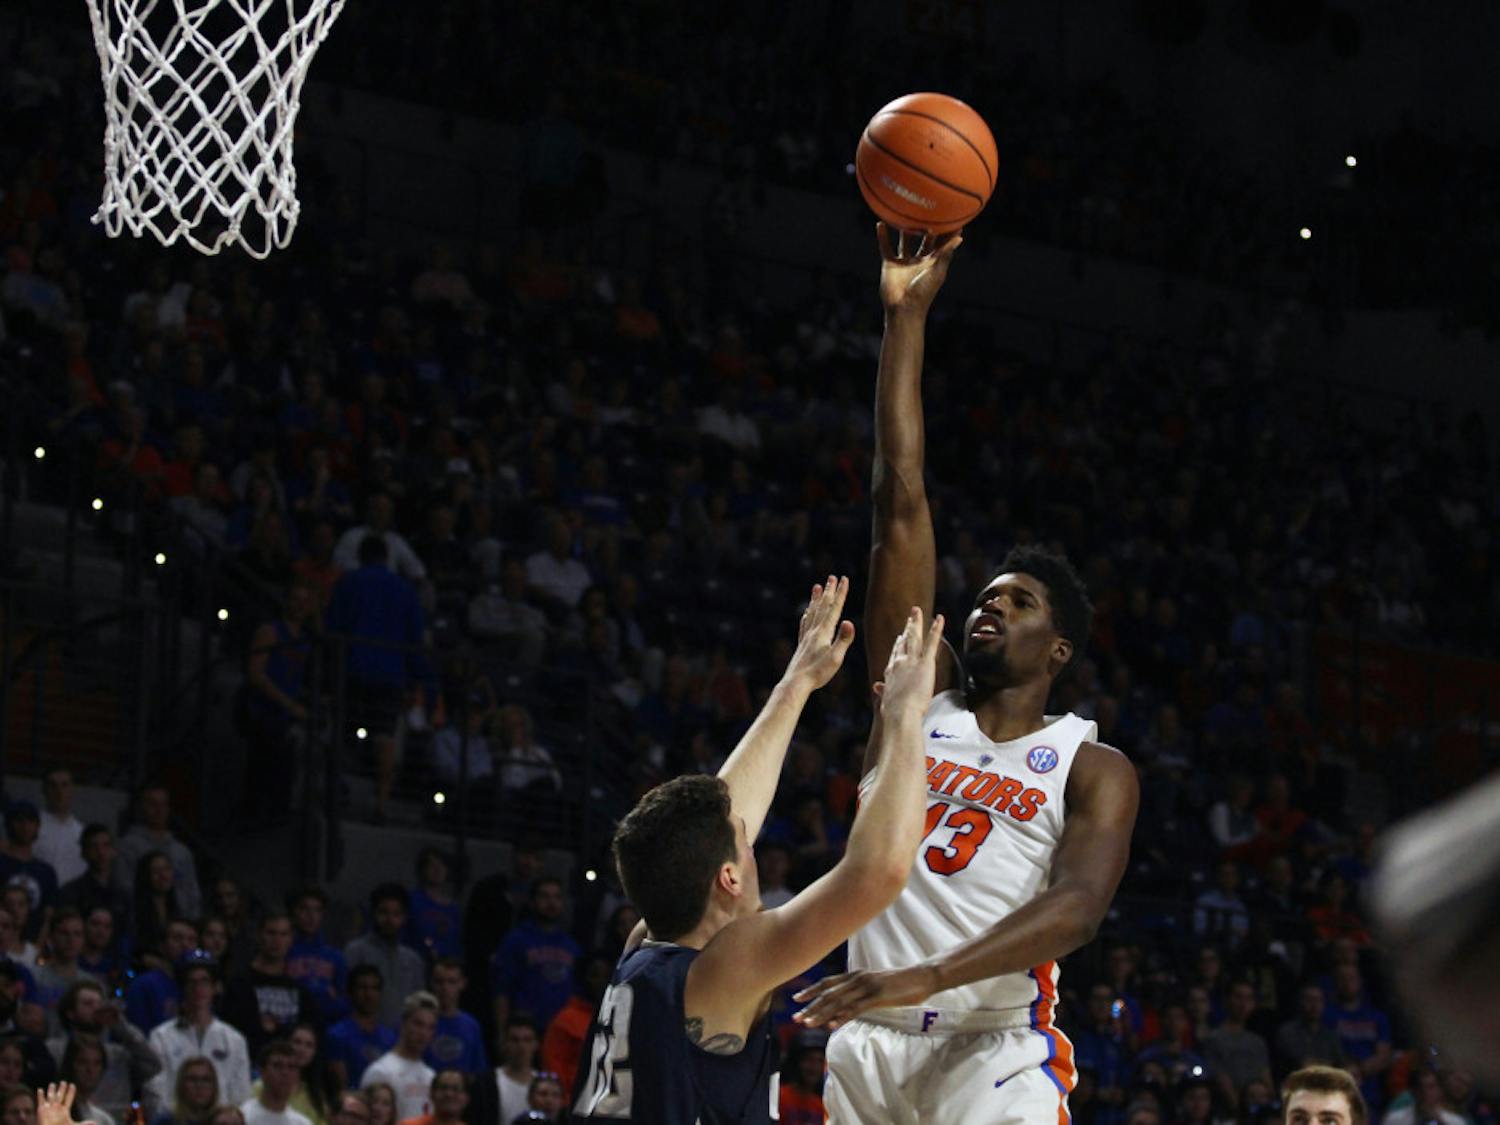 Florida coach Mike White said center Kevarrius Hayes is the only player devoting 100-percent effort to rebounding. “He’s been asked to go, it’s his job," White said, "Kevarrius Hayes - and he’s hard to block out because he goes 10 out of 10 times.”  